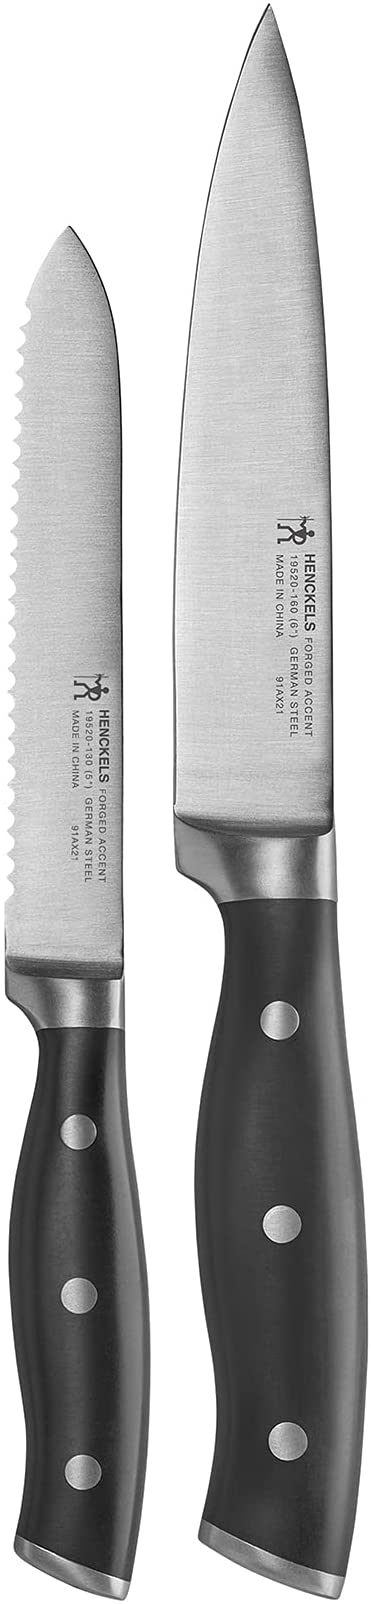 Henckels Forged Accent 2-pc Utility Set